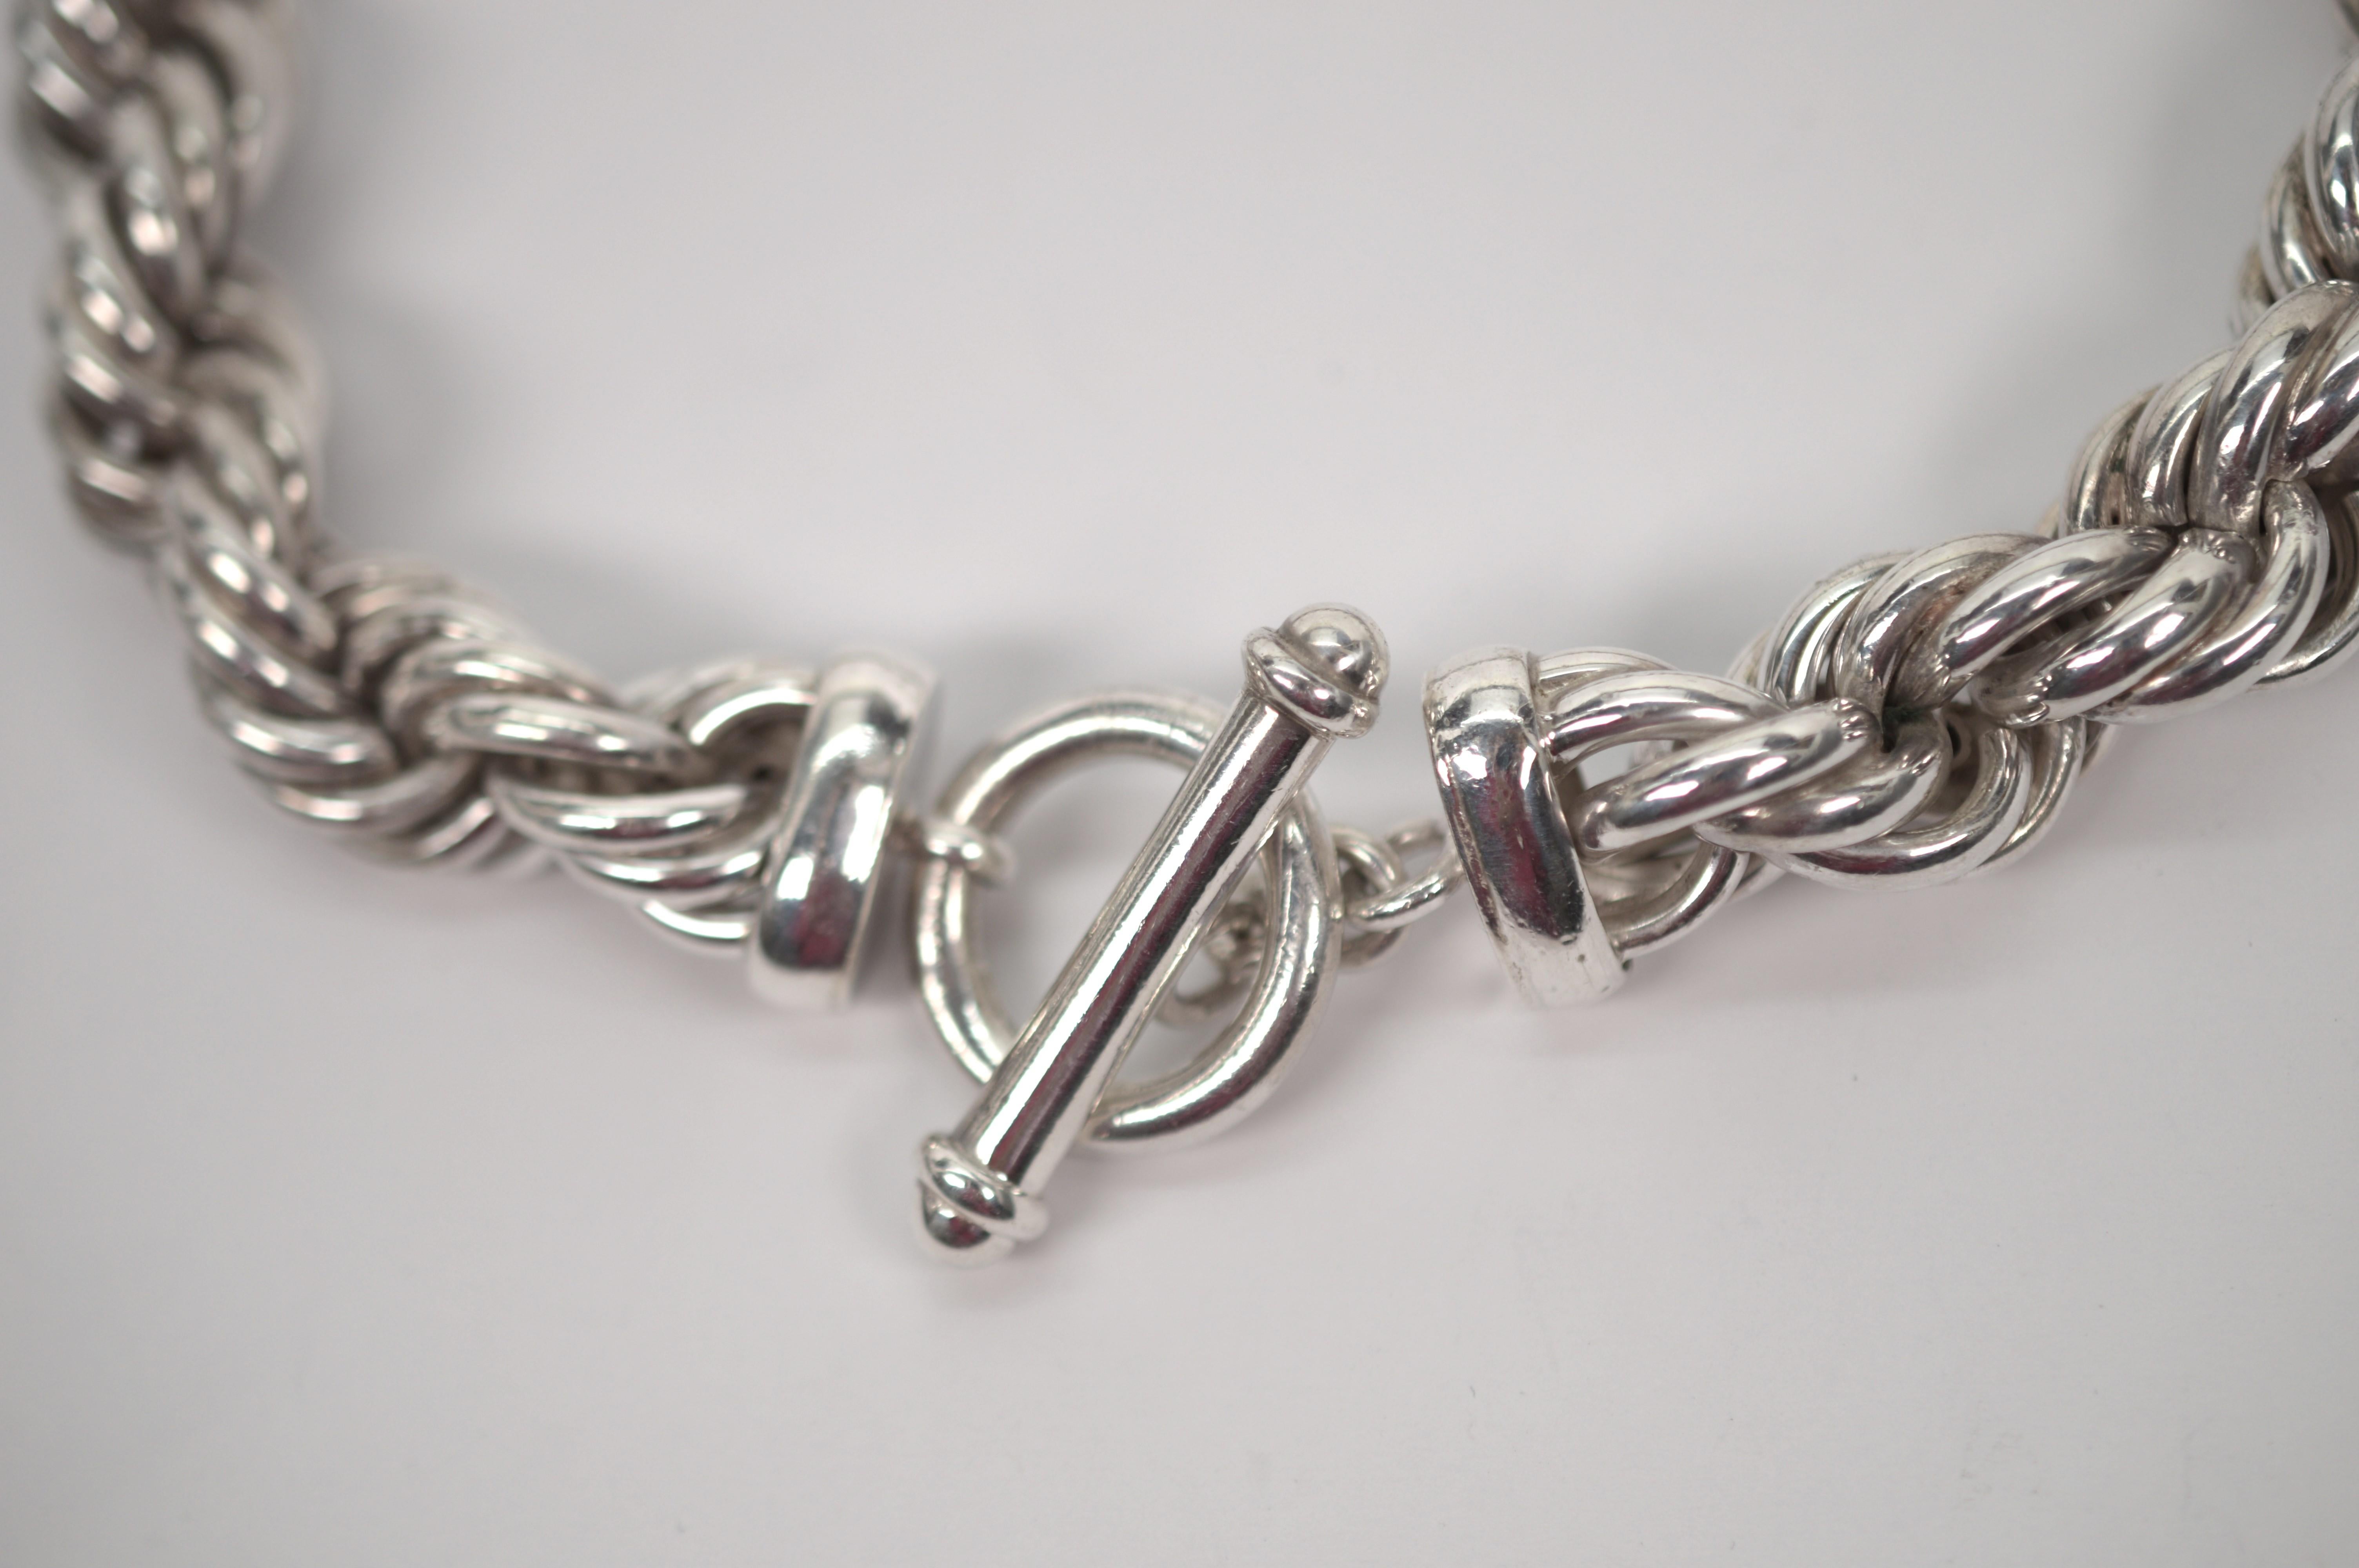 Women's or Men's Sterling Silver Chunky Twist Rope Chain Necklace w Toggle Clasp For Sale